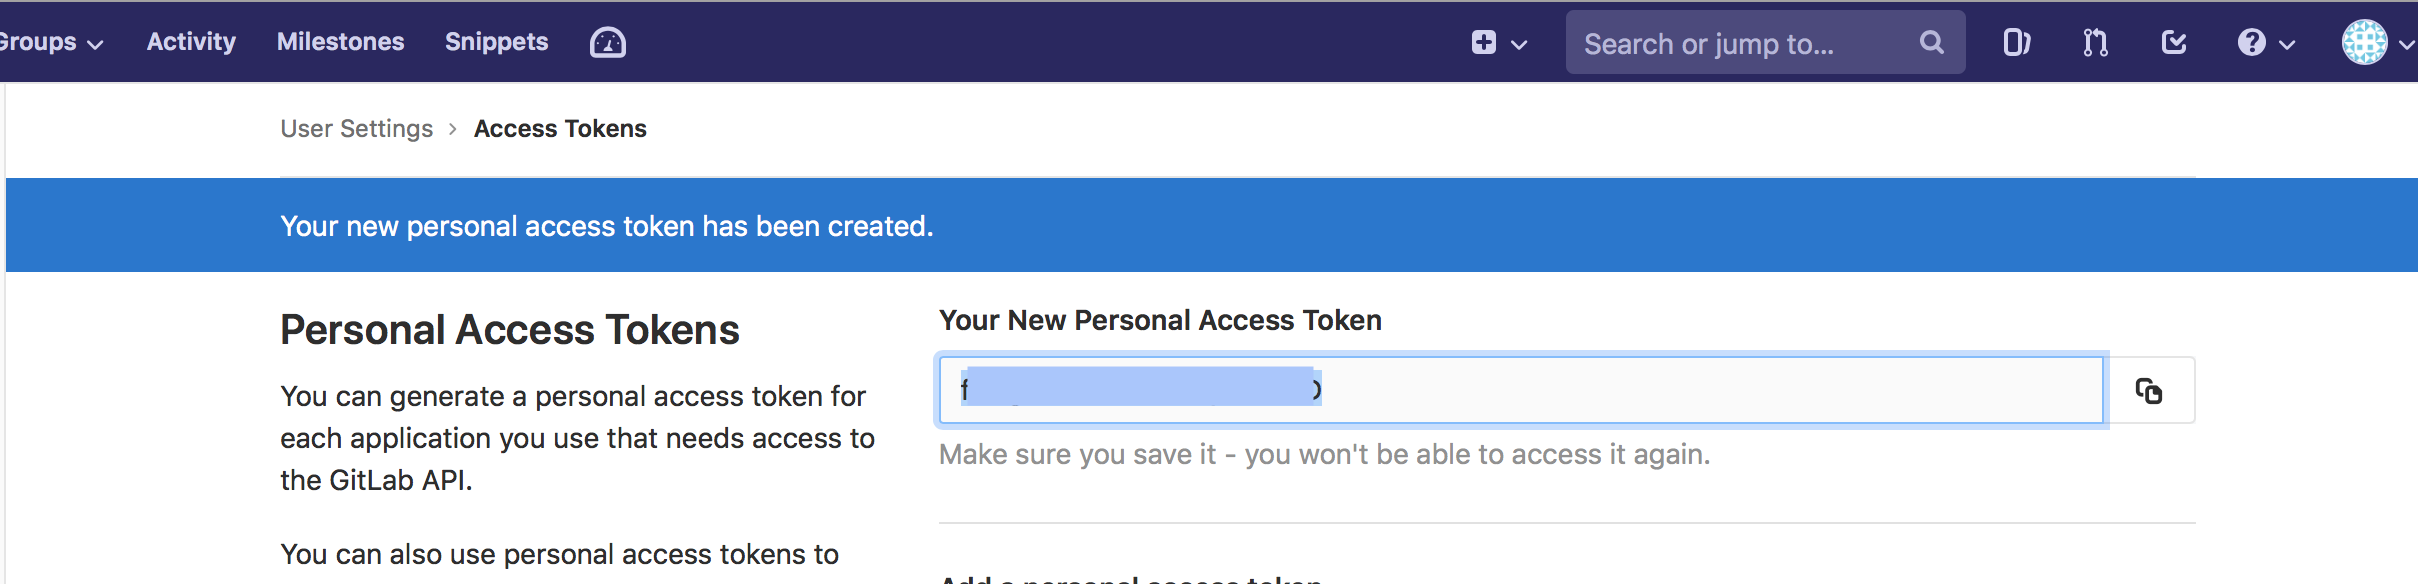 Clubhouse_GitLab_Access_Token_Generated.png